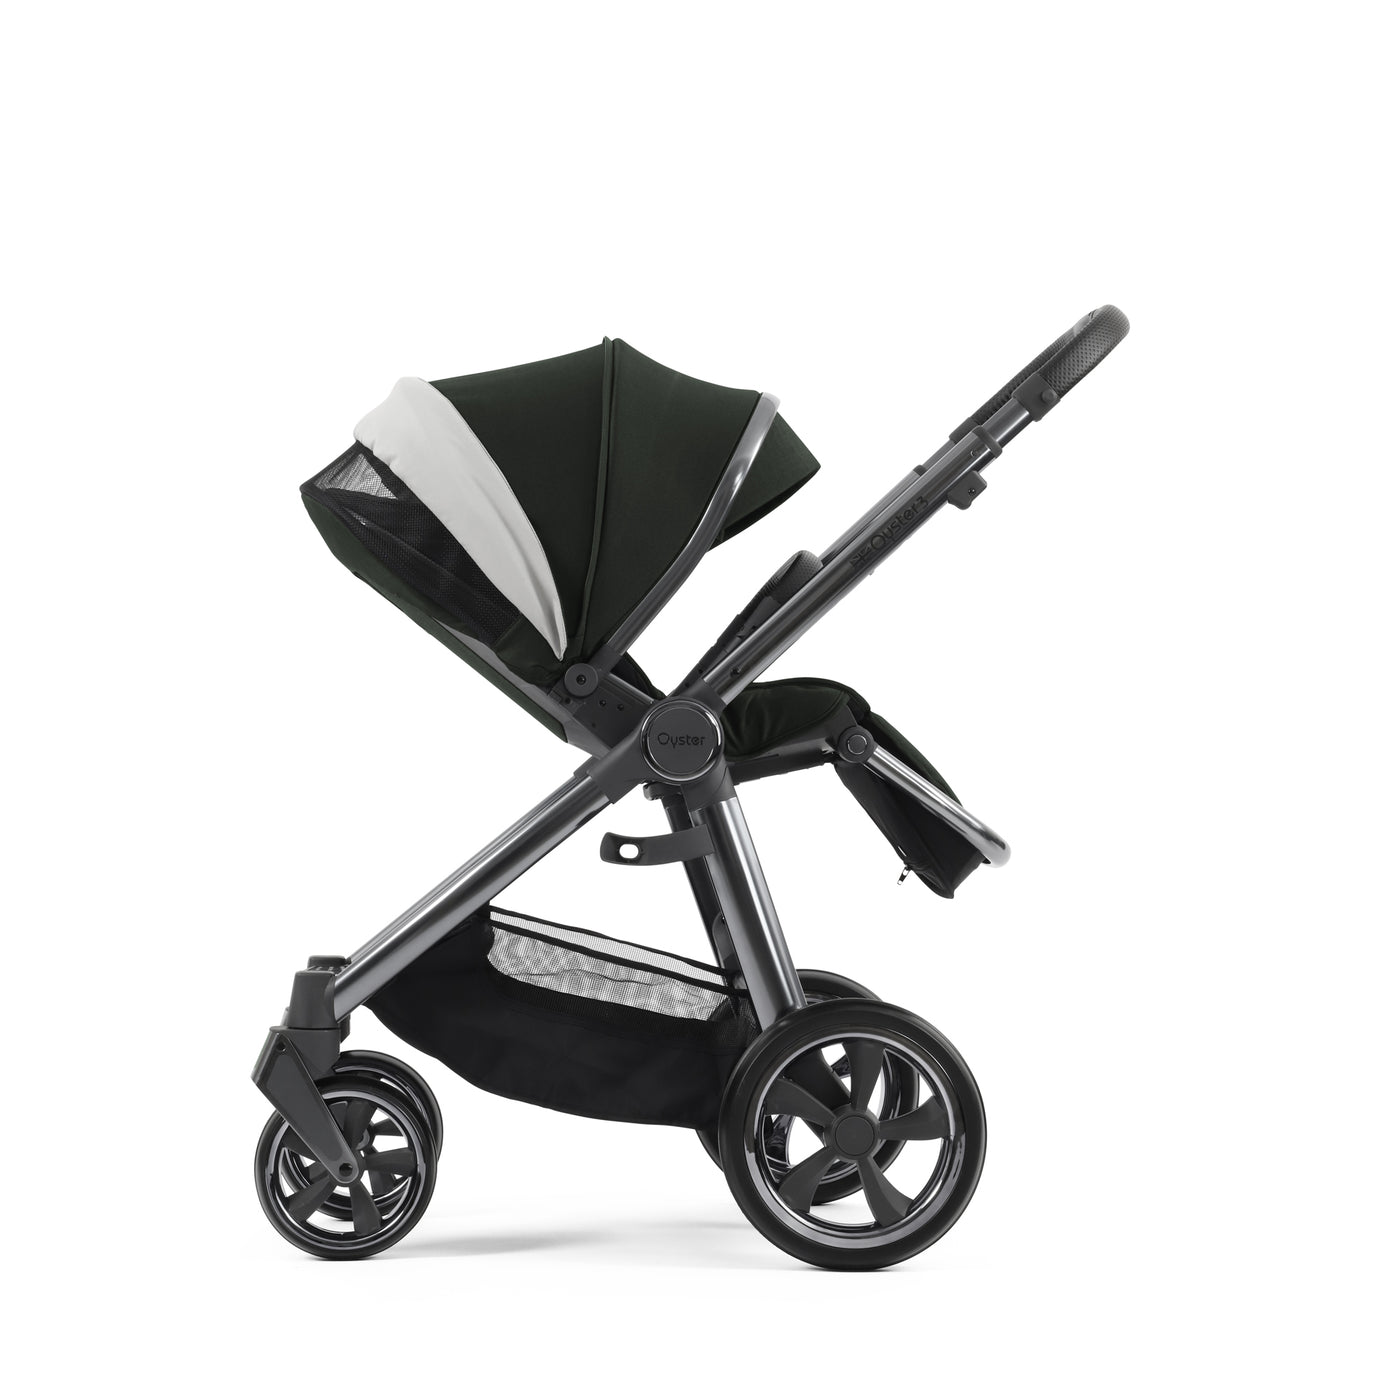 Babystyle Oyster 3 Pushchair - Black Olive